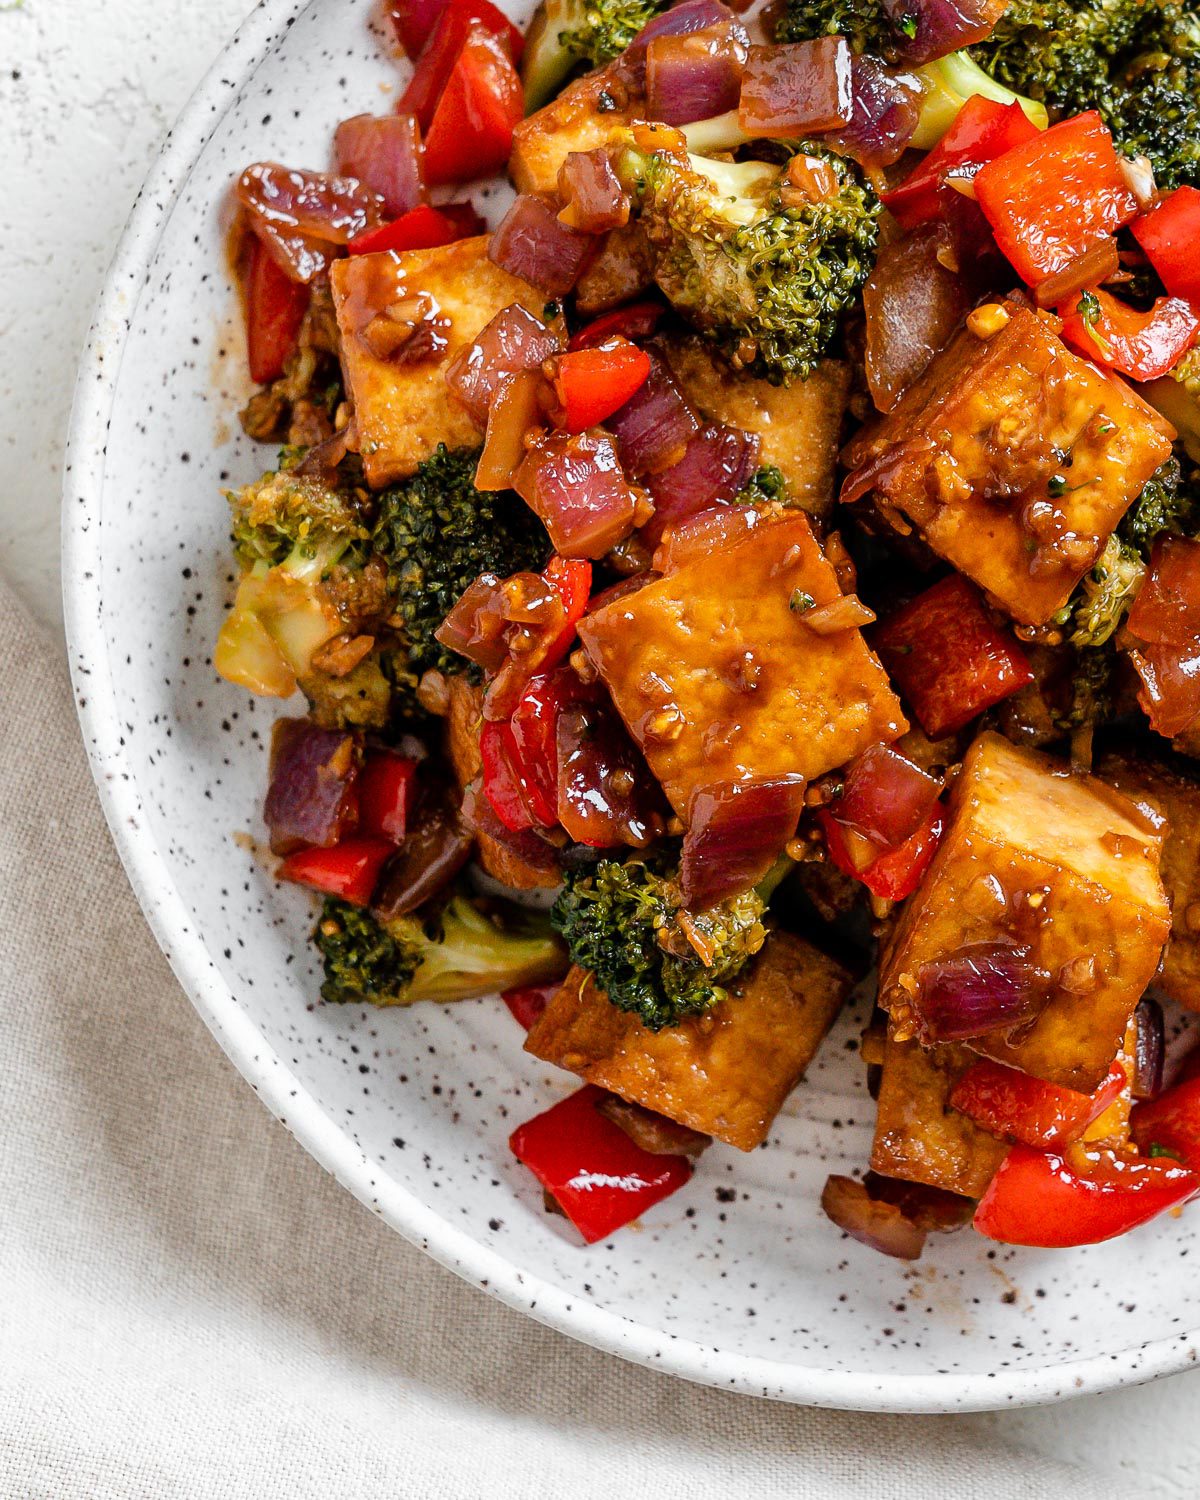 completed Vegan Teriyaki Tofu Stir Fry plated on a white bowl against a light surface